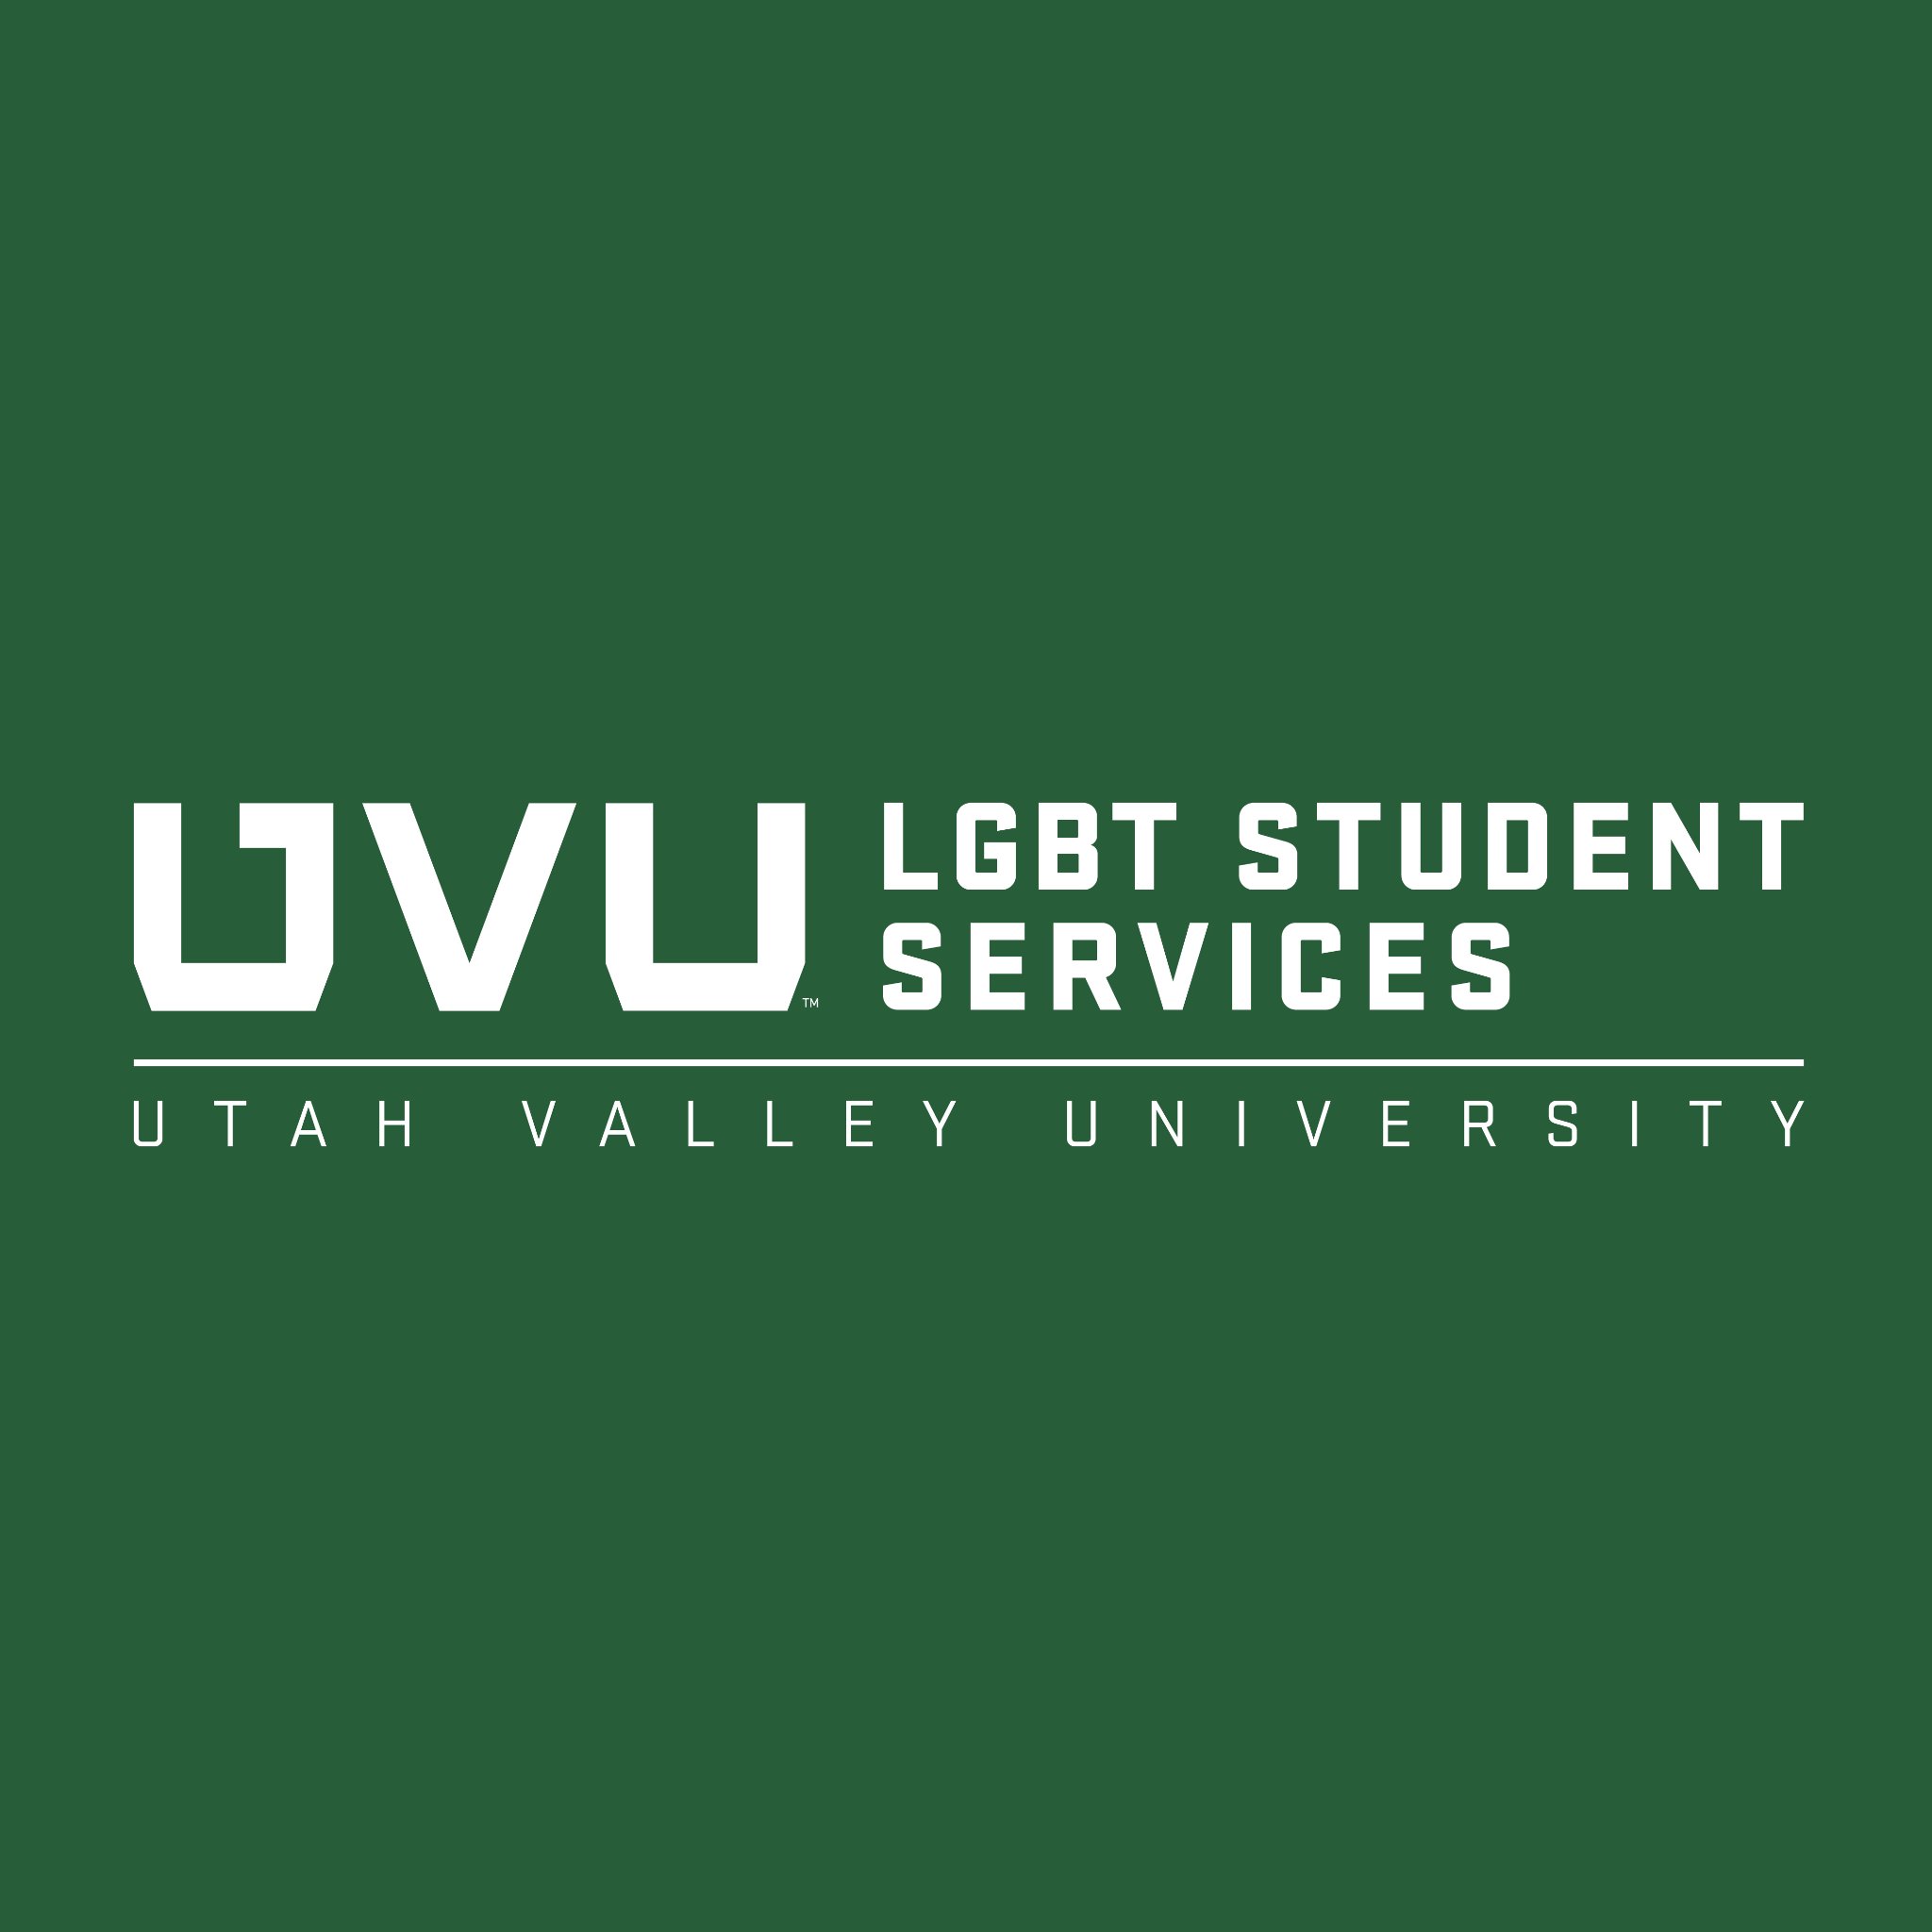 LGBT Student Services is designed for students who are seeking services, support and opportunities for personal growth, safety and a sense of belonging at UVU.